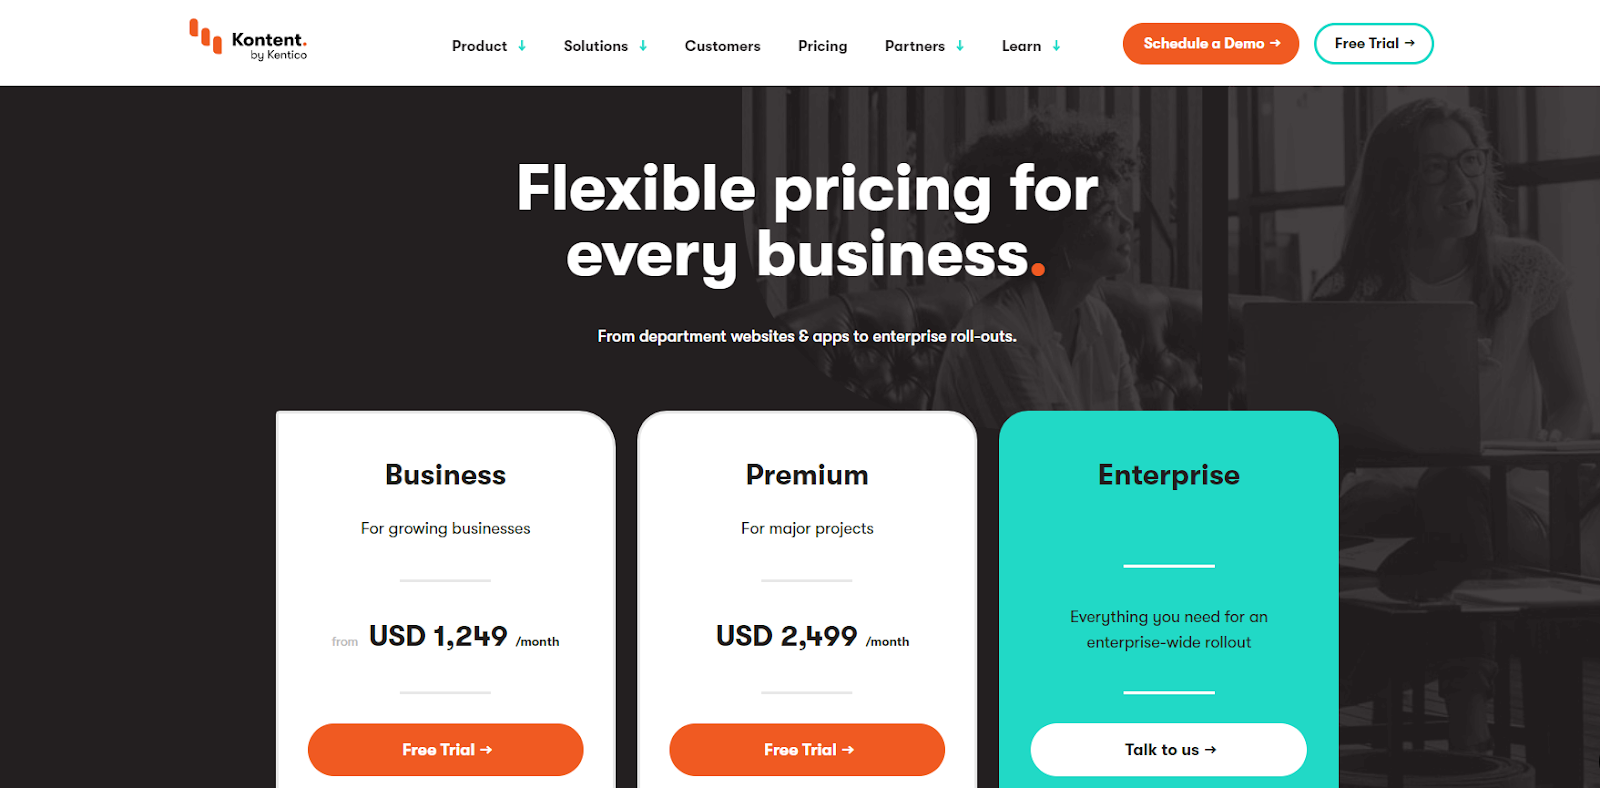 Pricing slabs for Kontent headless commerce services